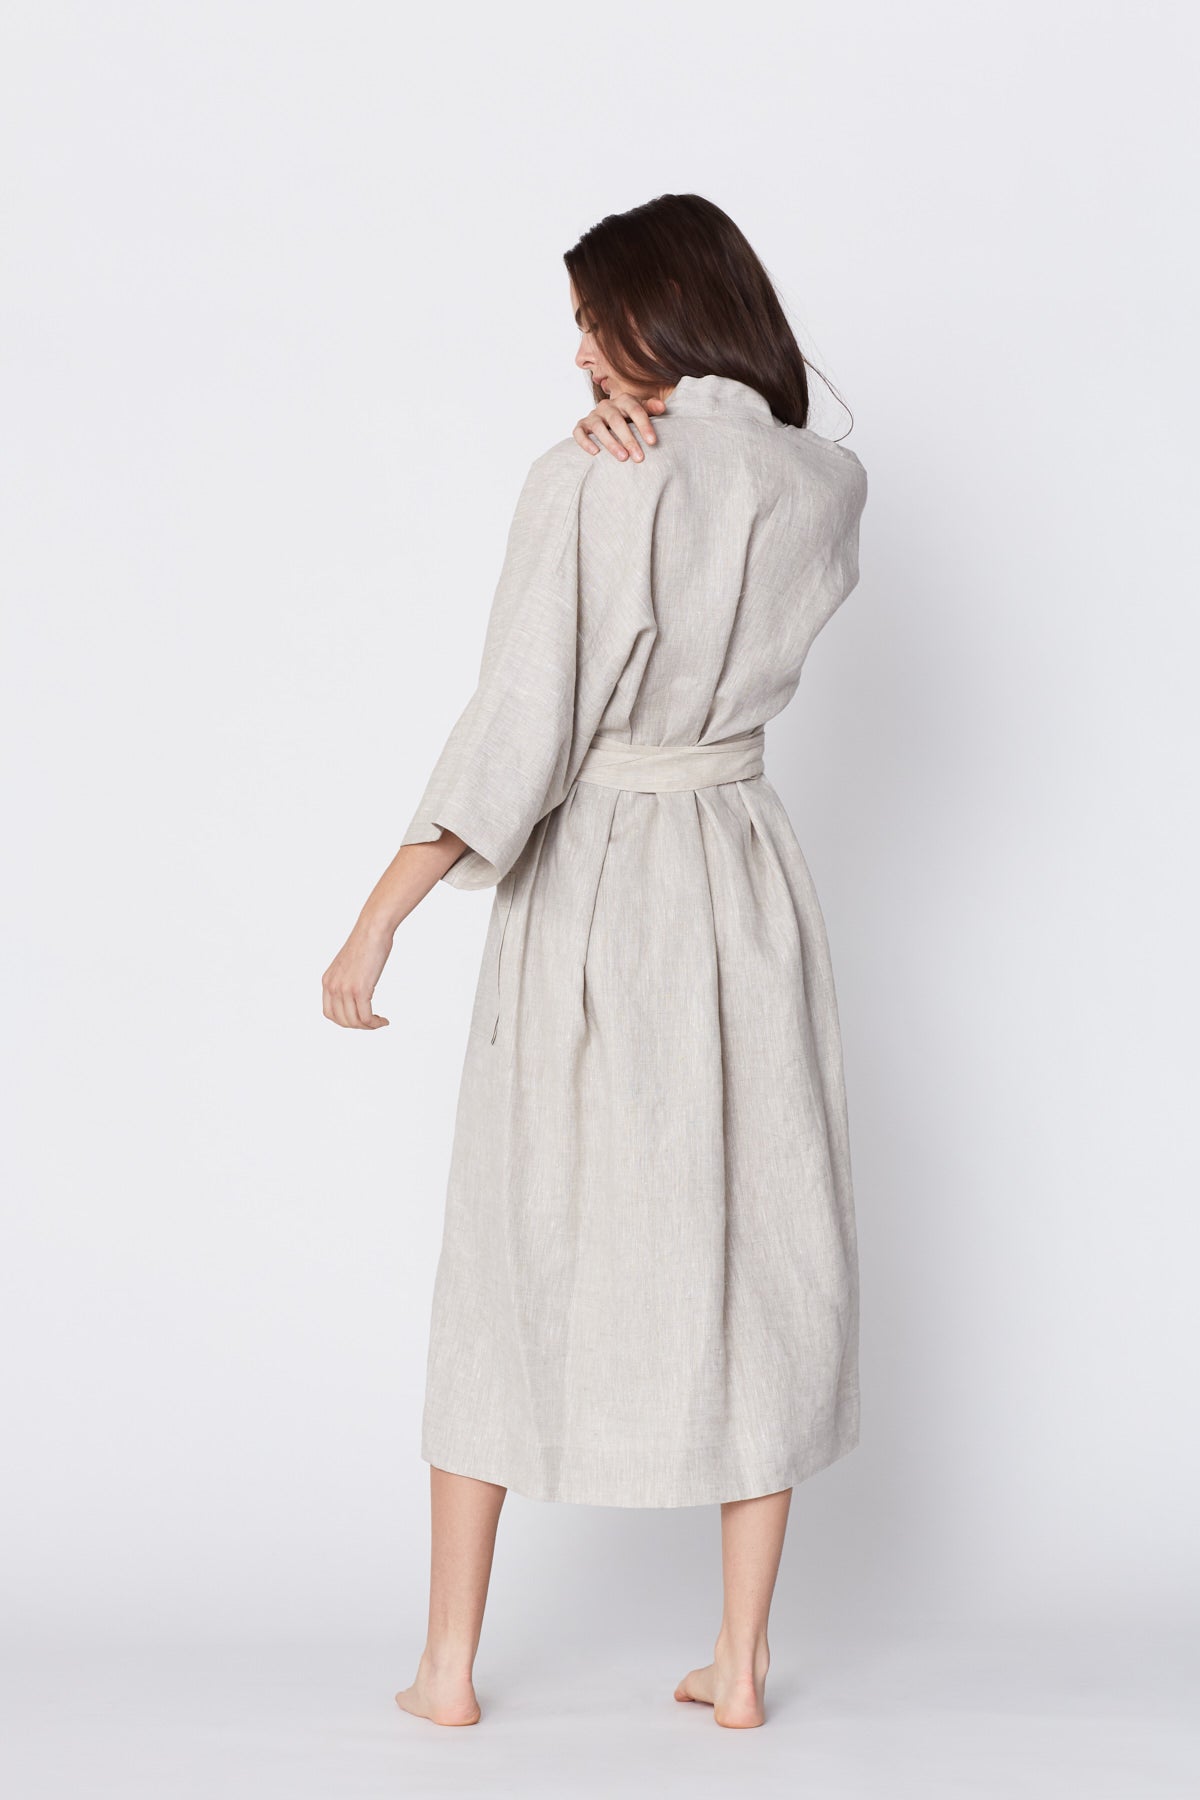 Kimono in Natural Linen. Made in Atlanta, ethically and sustainably, by slow fashion designer Megan Huntz. 